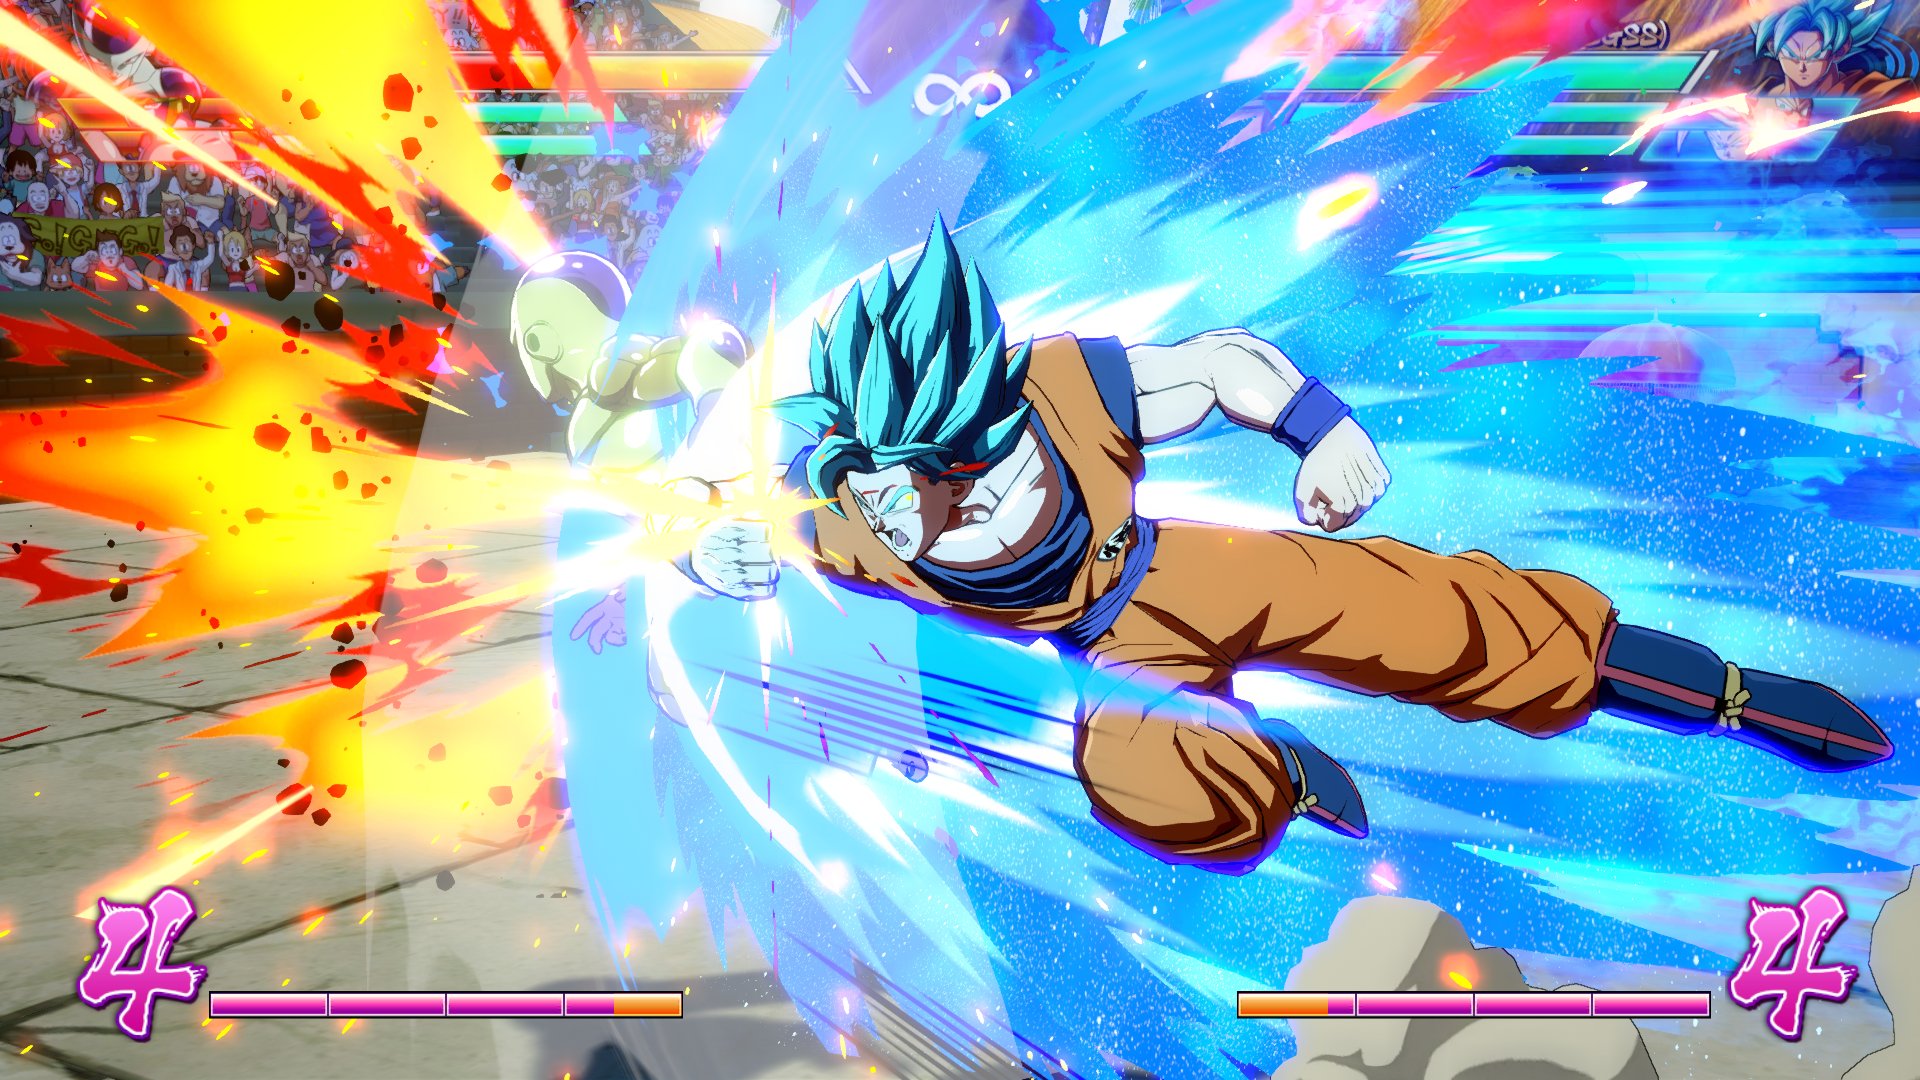 The Full Dragon Ball Fighterz Trophy Achievement List Blasts Out Just Push Start